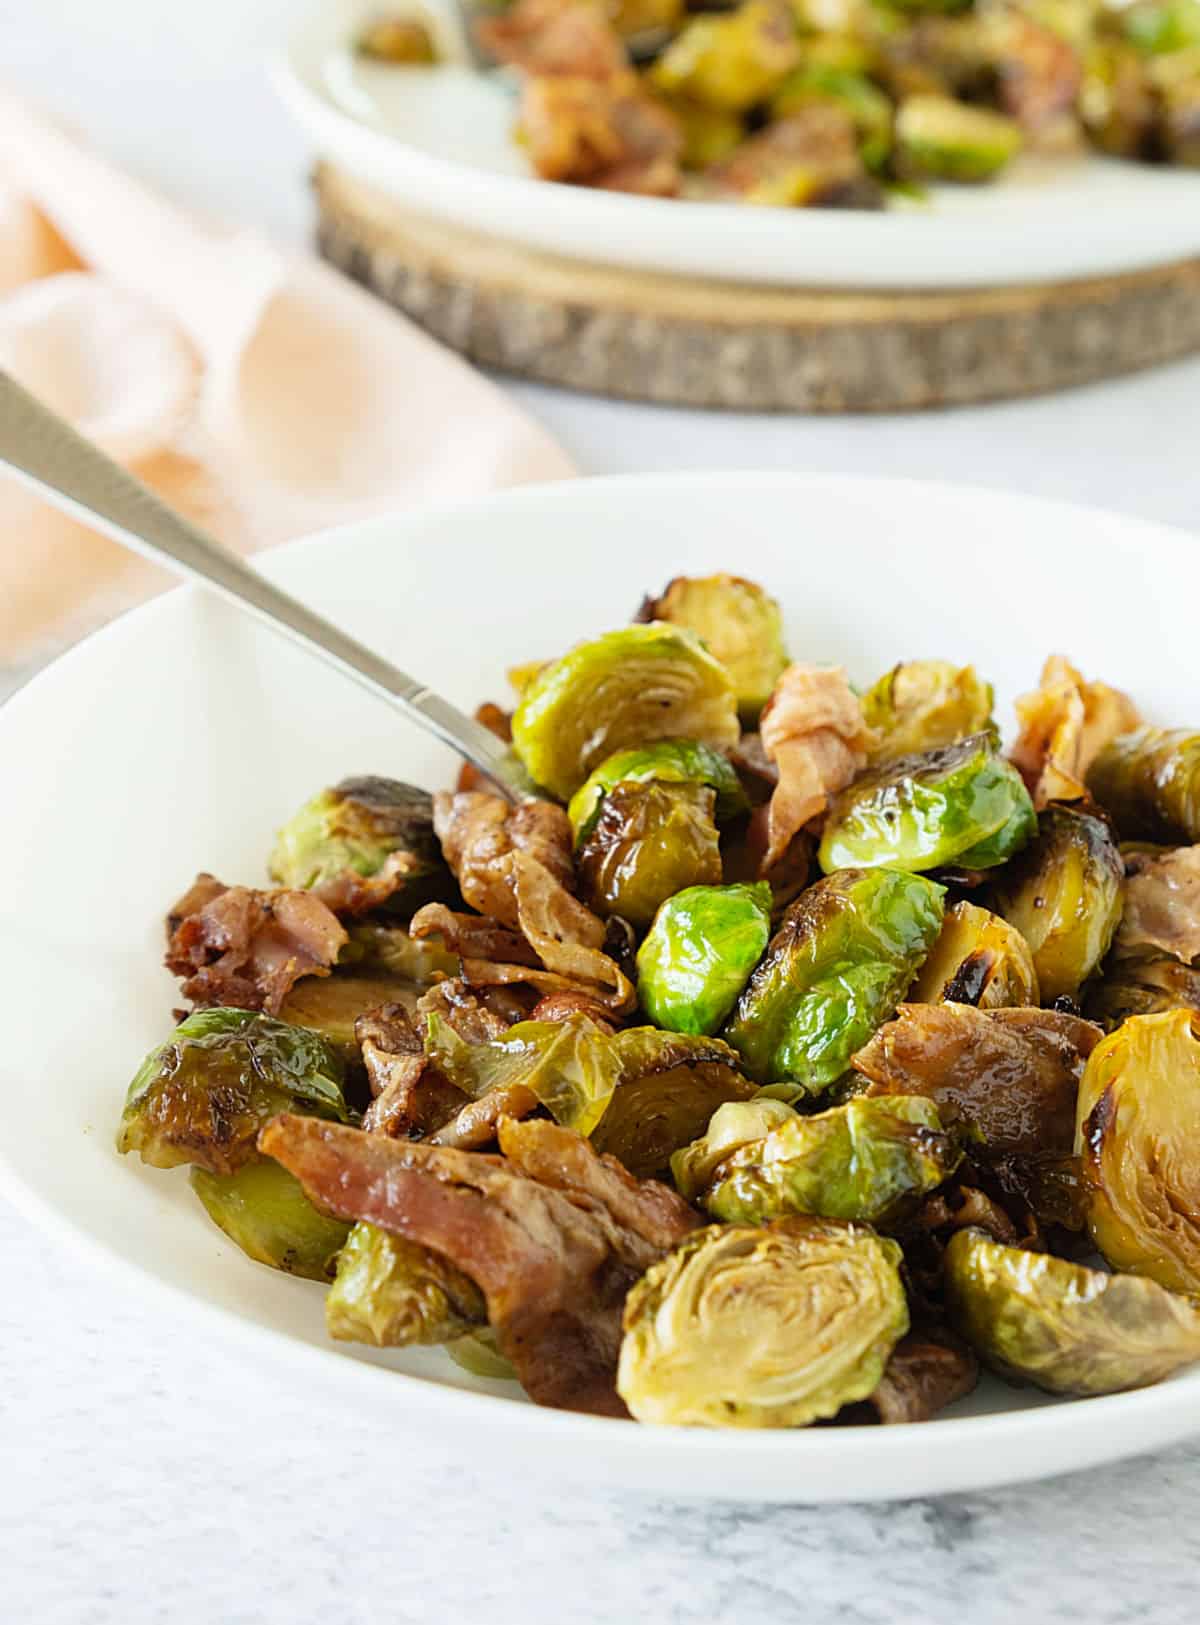 Brussels sprouts with bacon in a white bowl with silver spoon. Another plate and pink cloth in the background.